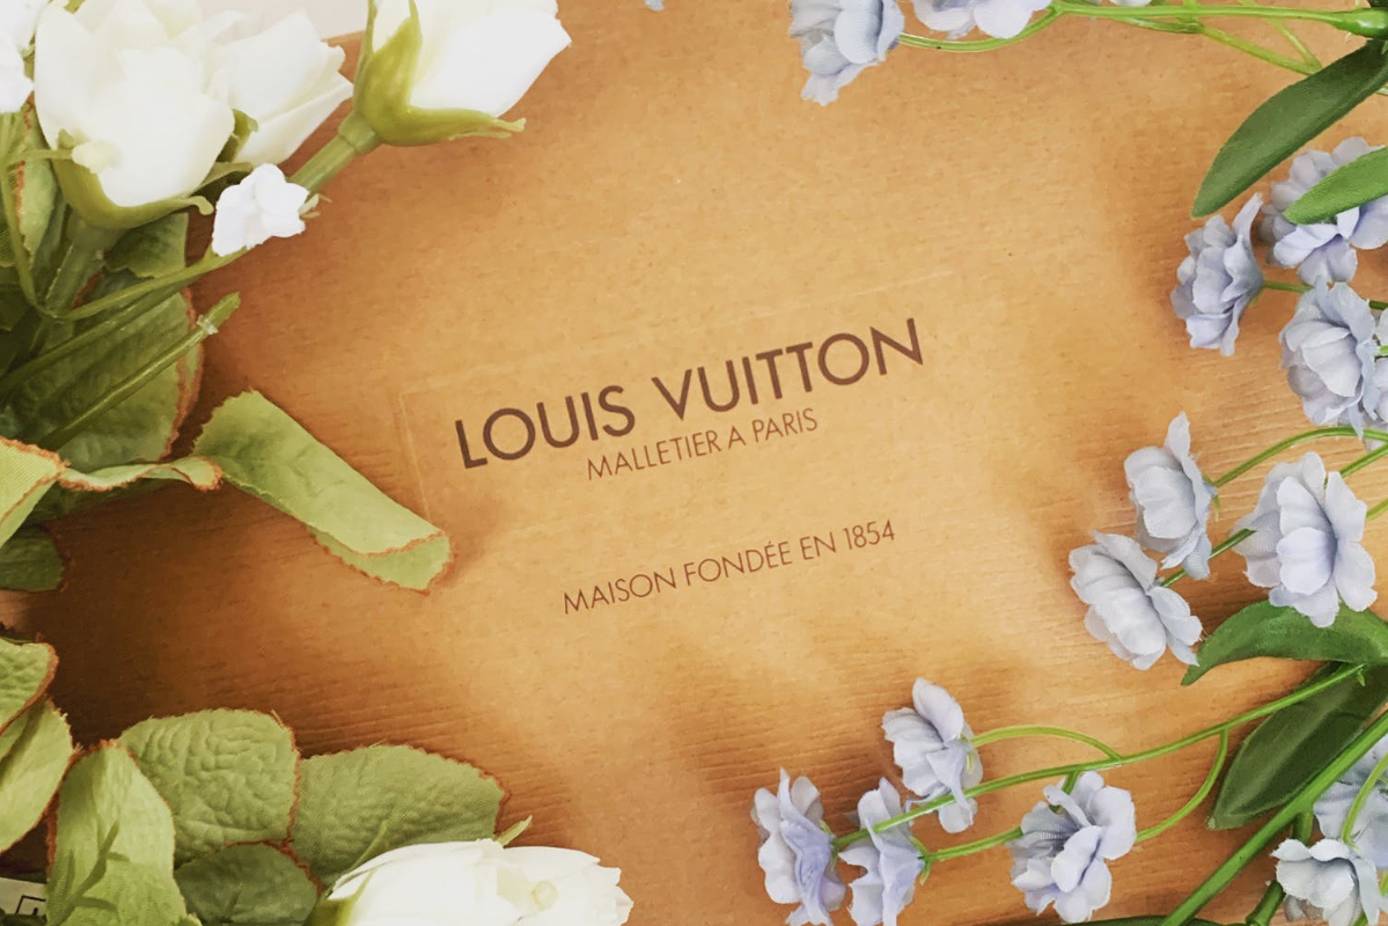 RankingRoyals - Louis Vuitton Moet Hennessy(LVMH) is the most